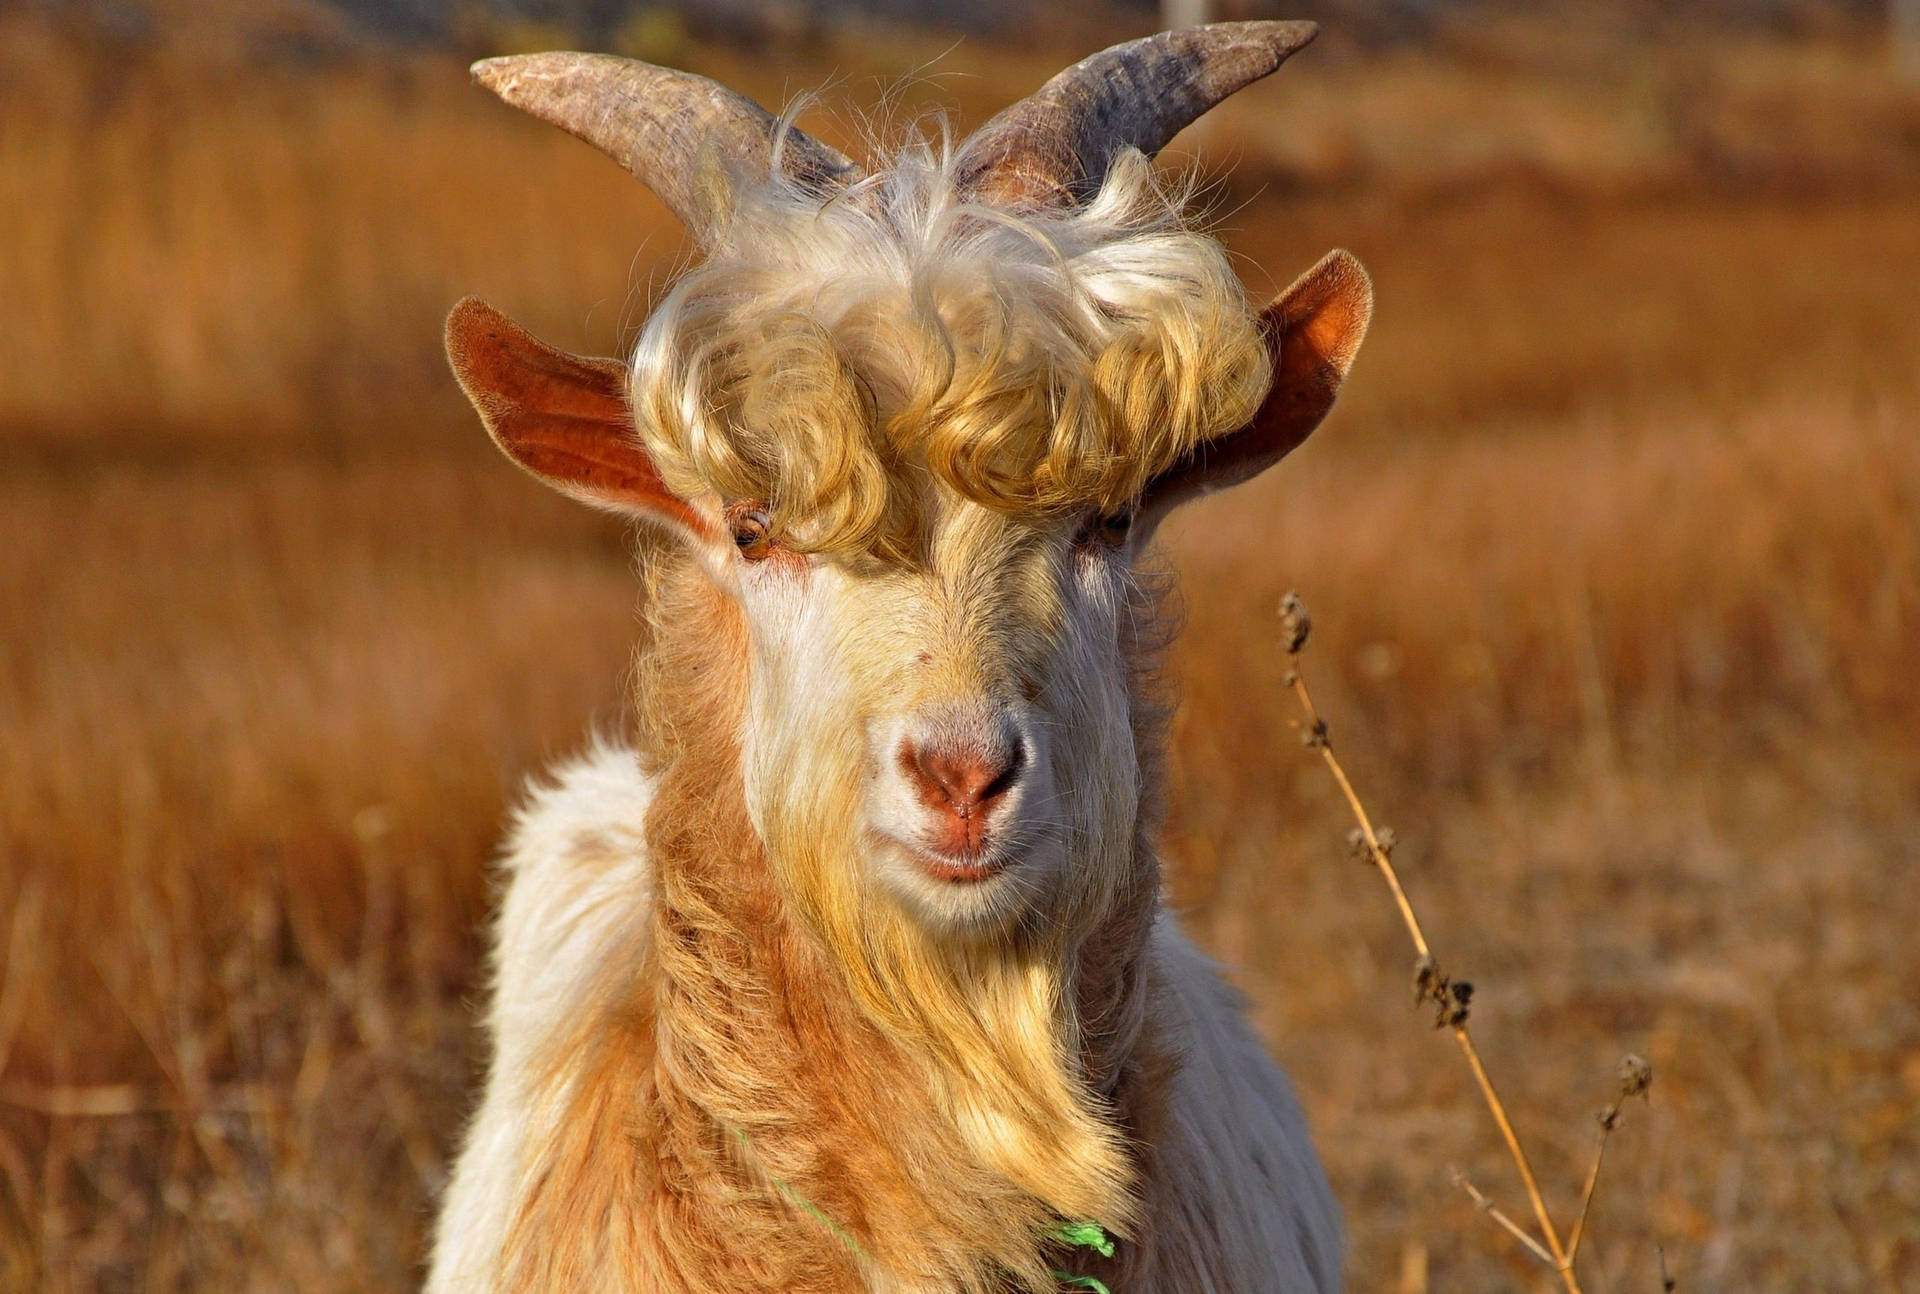 A Majestic Goat with Curly Hair Wallpaper